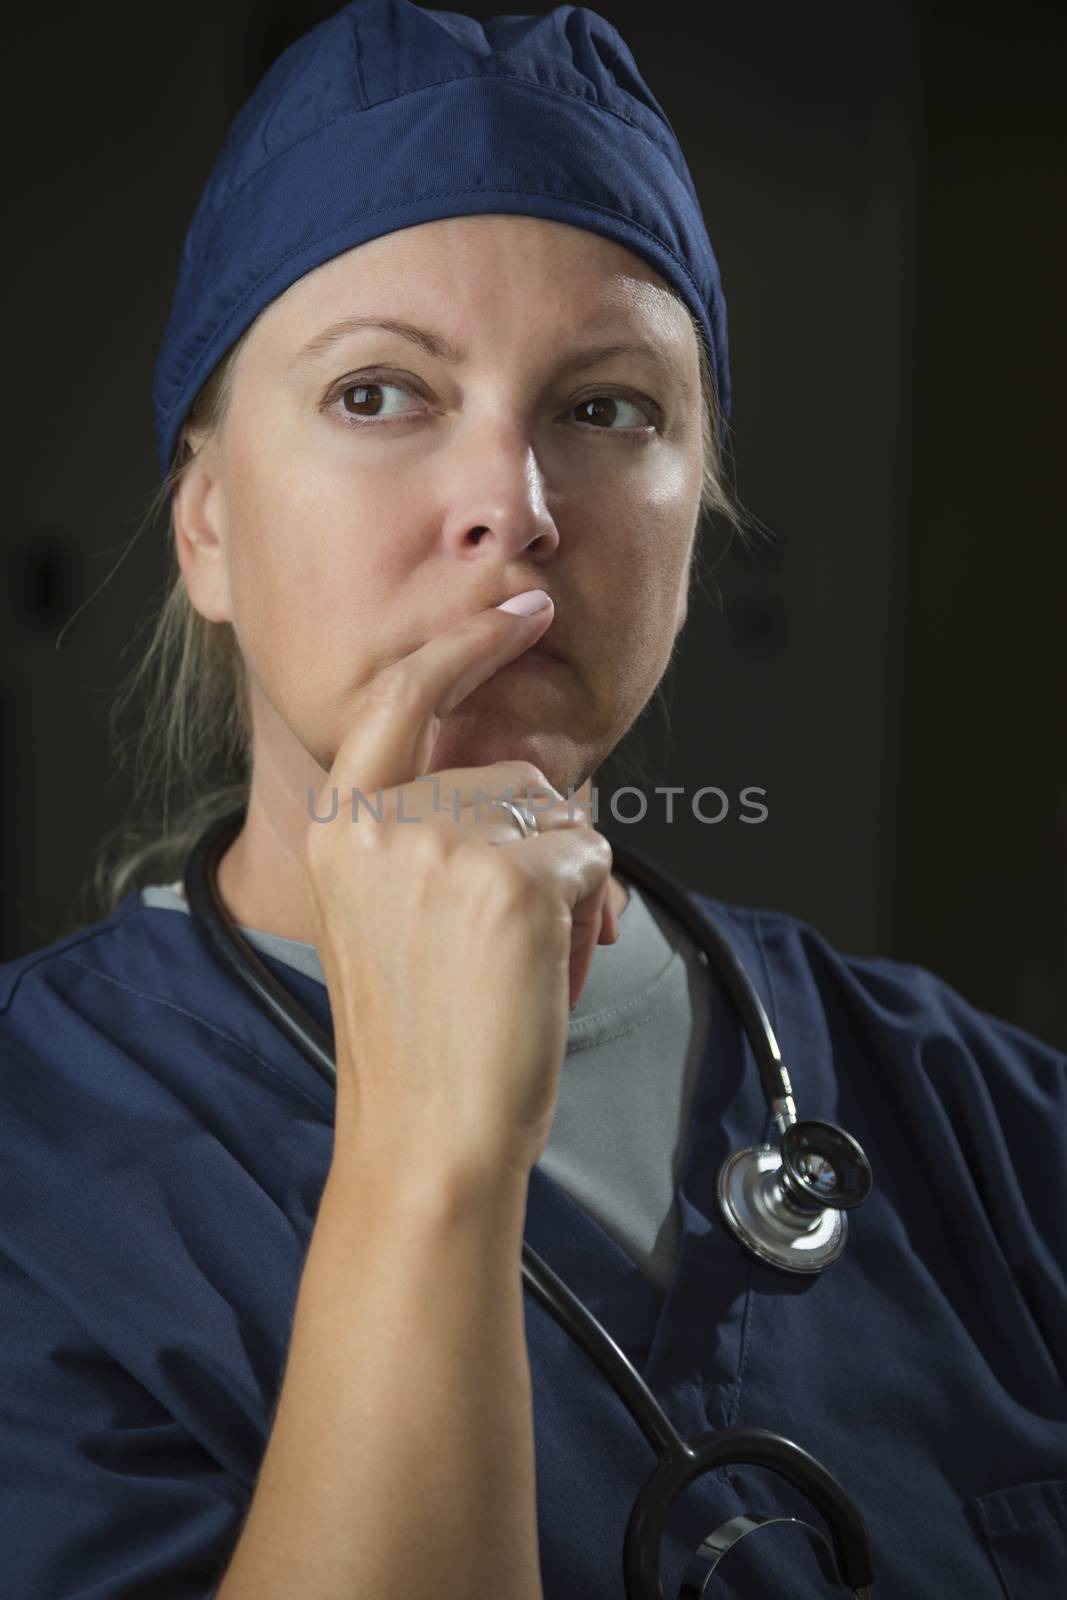 Attractive Female Doctor or Nurse Portrait by Feverpitched